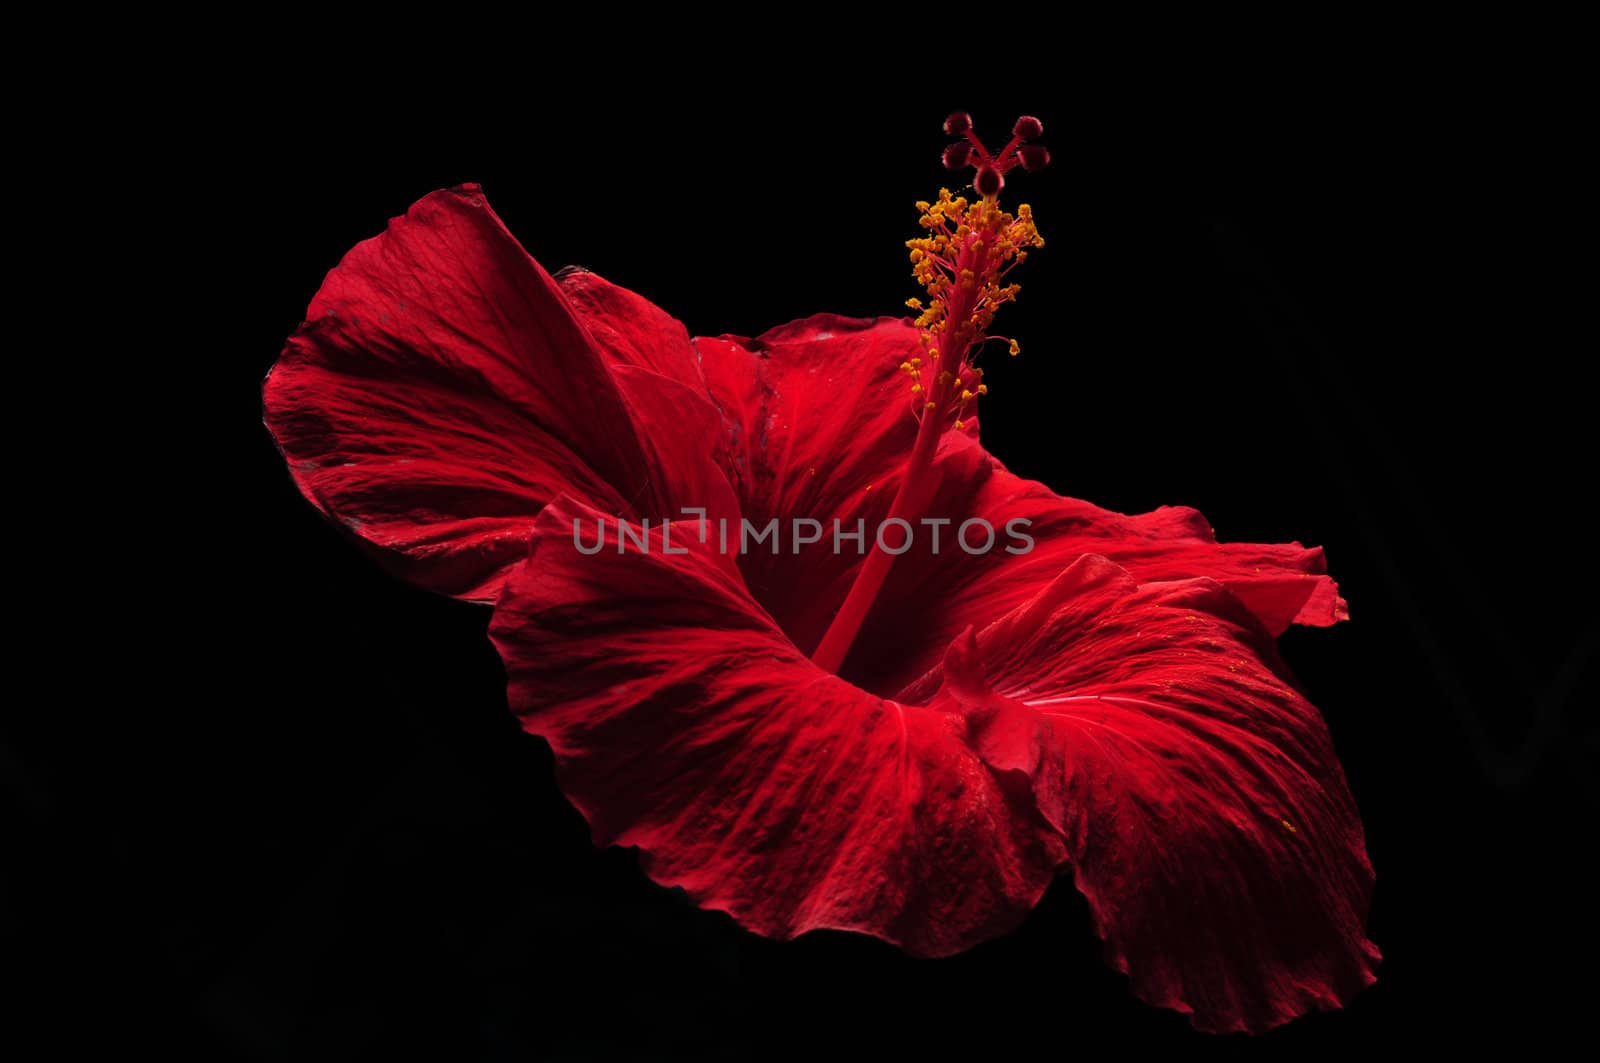 Black background with a red hibiscus flower with yellow stamen